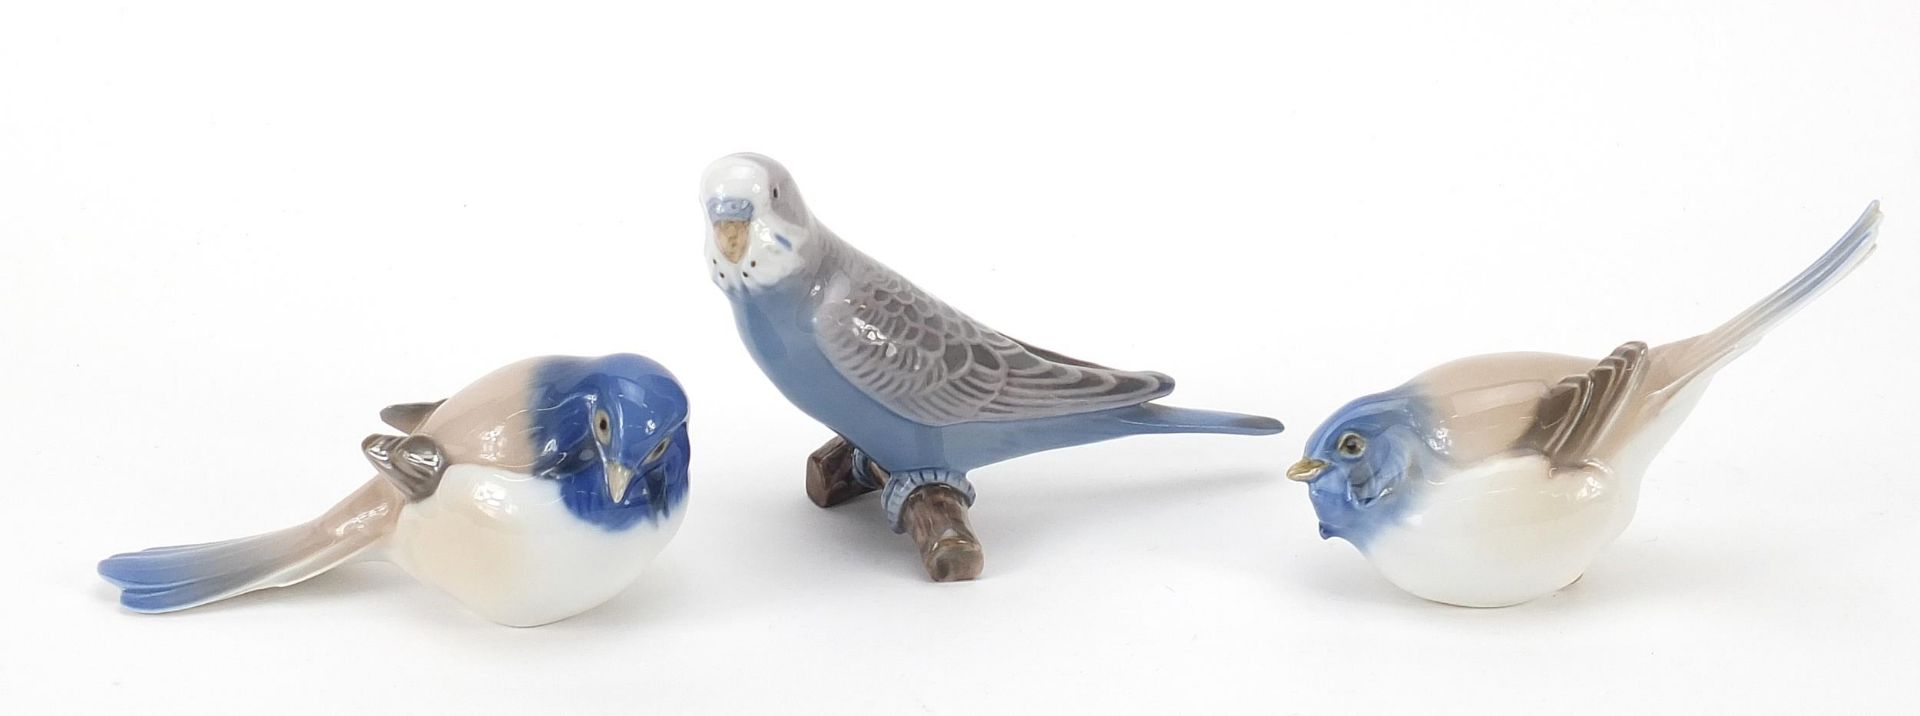 Bing & Grundell, three Danish porcelain birds including a budgie, the largest 14cm in length The